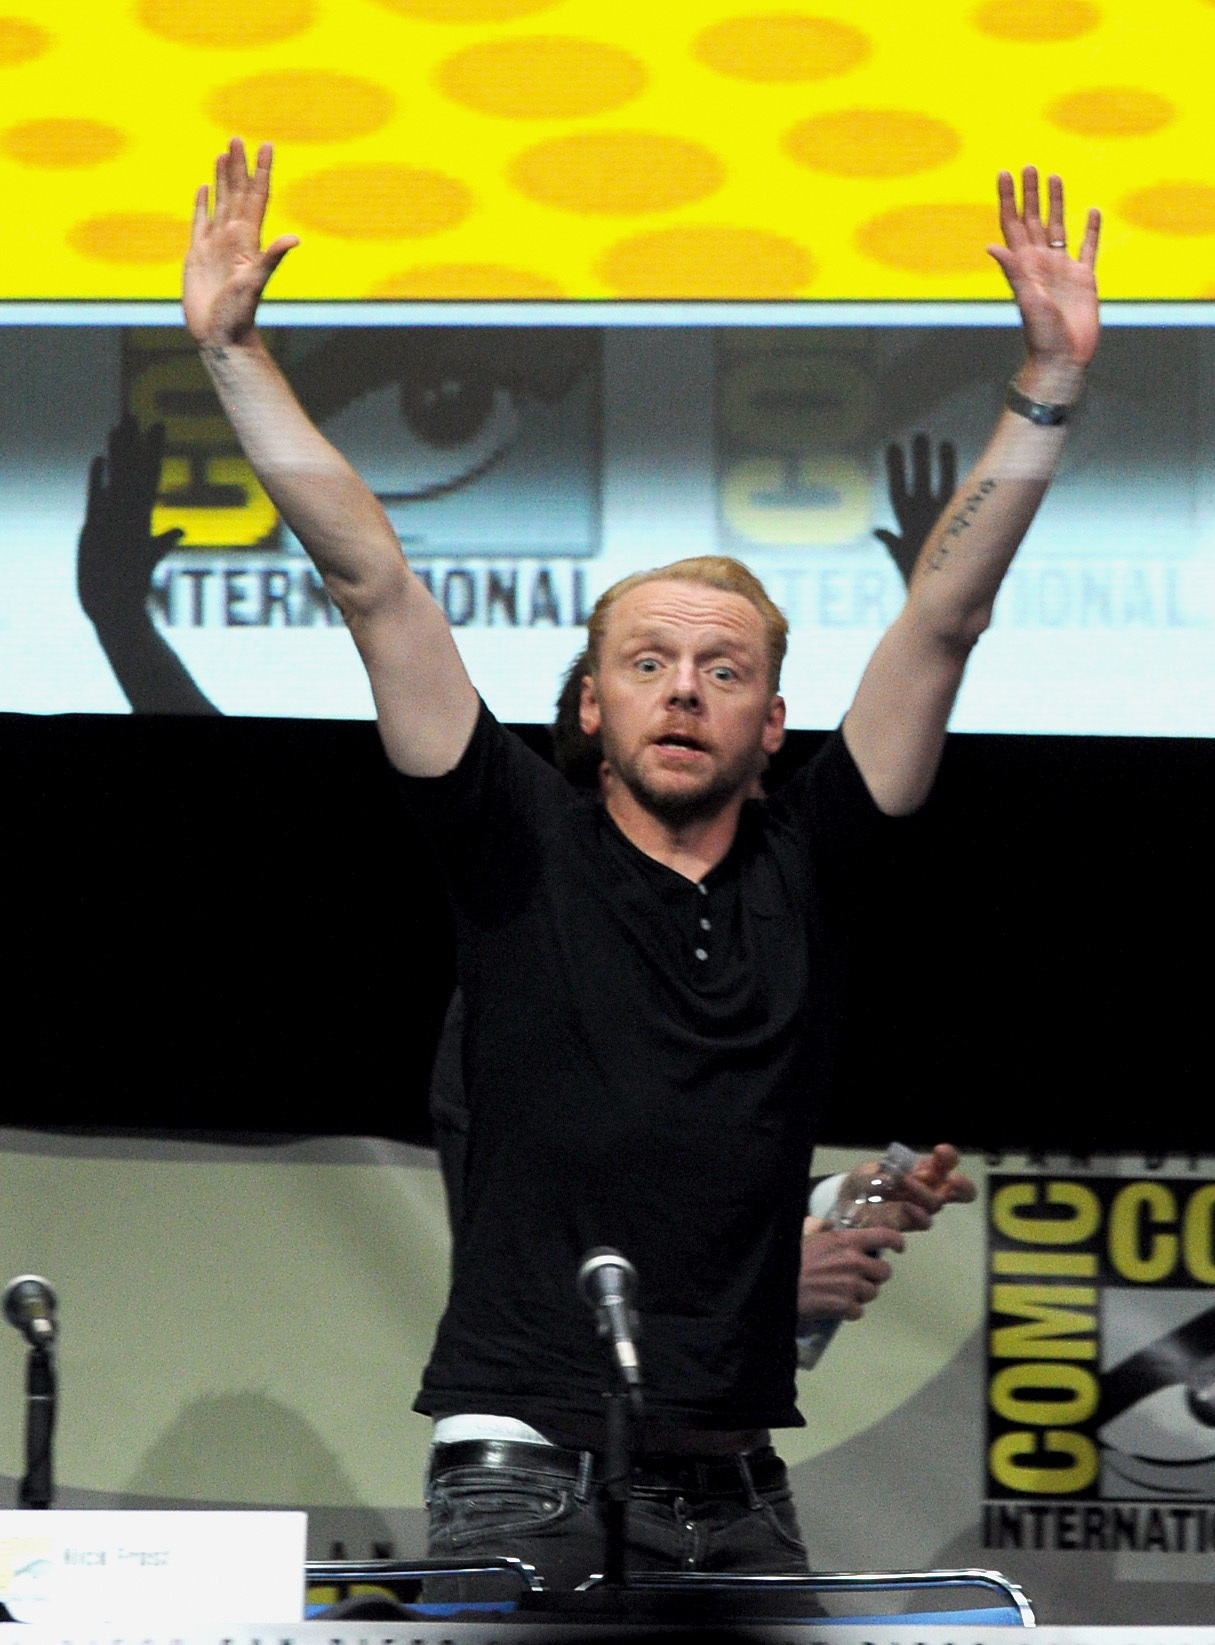 Simon Pegg at event of The World's End (2013)